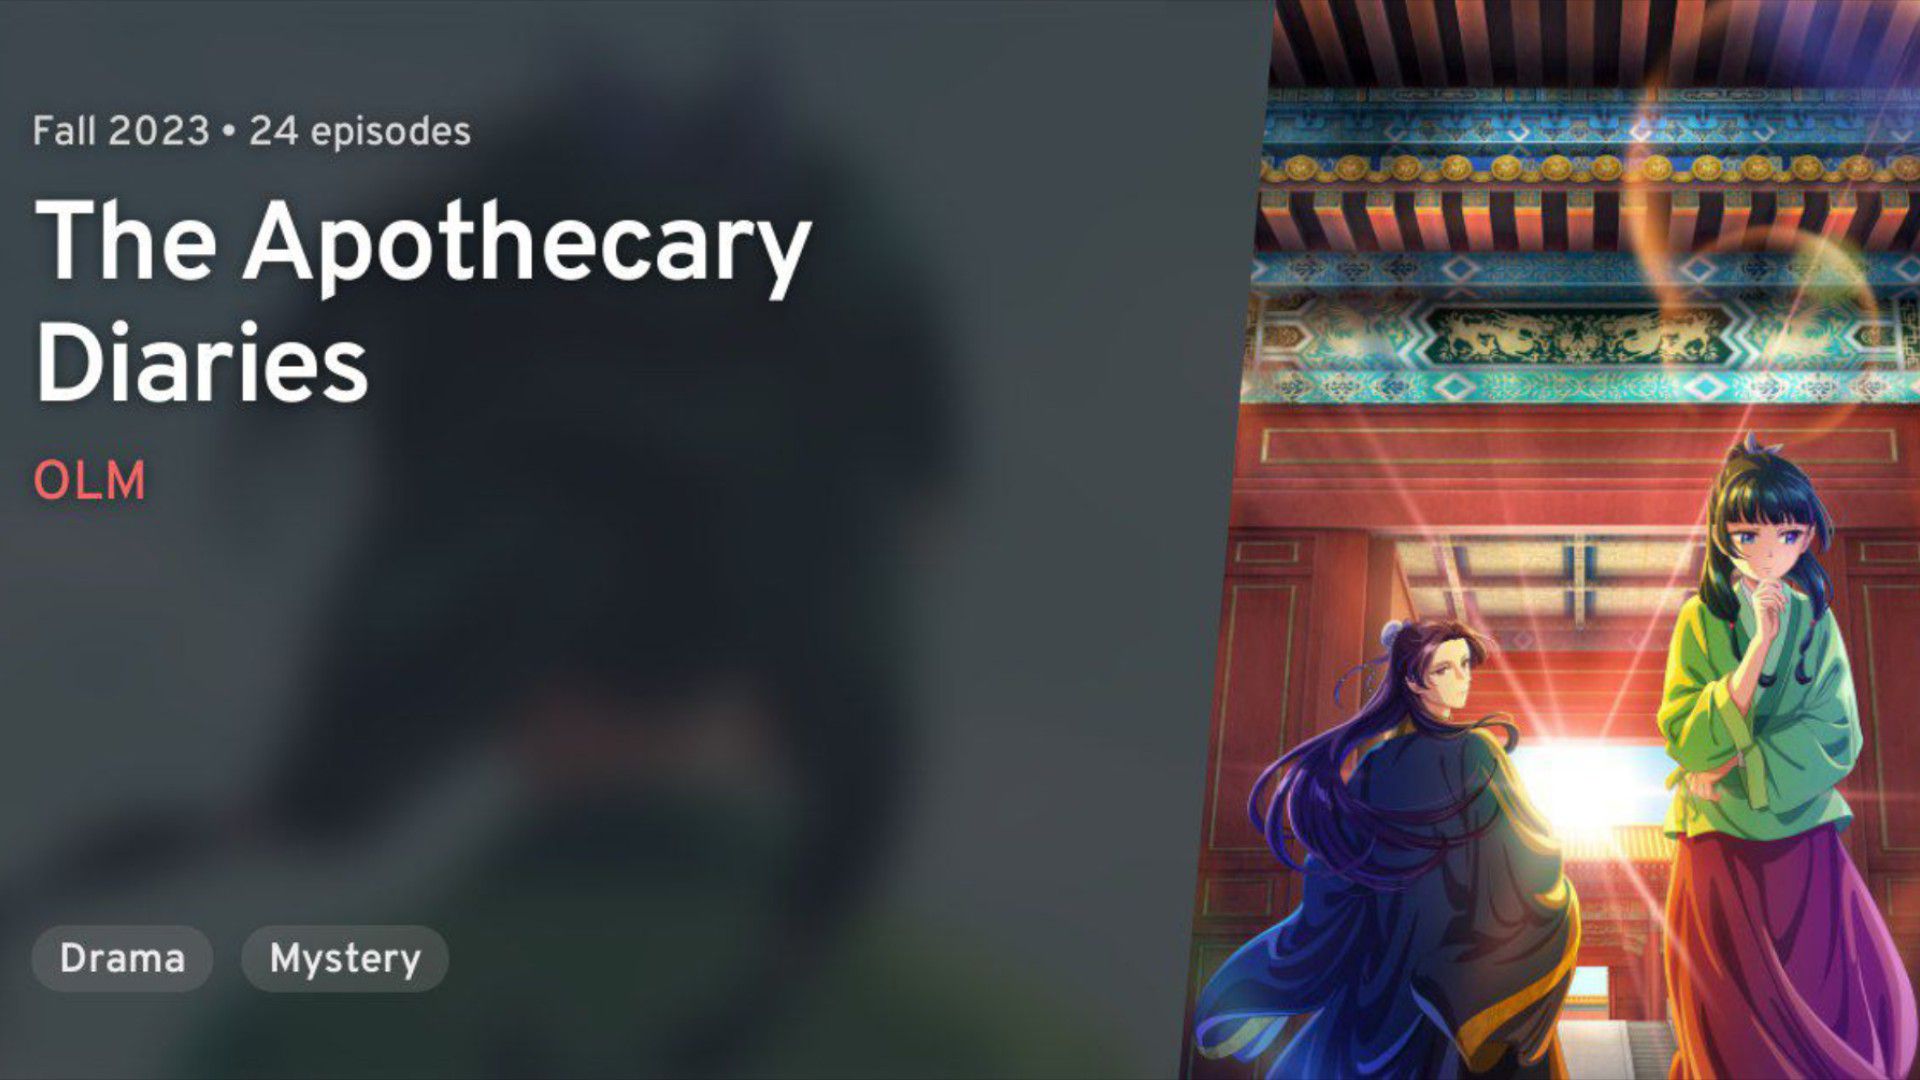 Fall 2023 Preview: The Apothecary Diaries